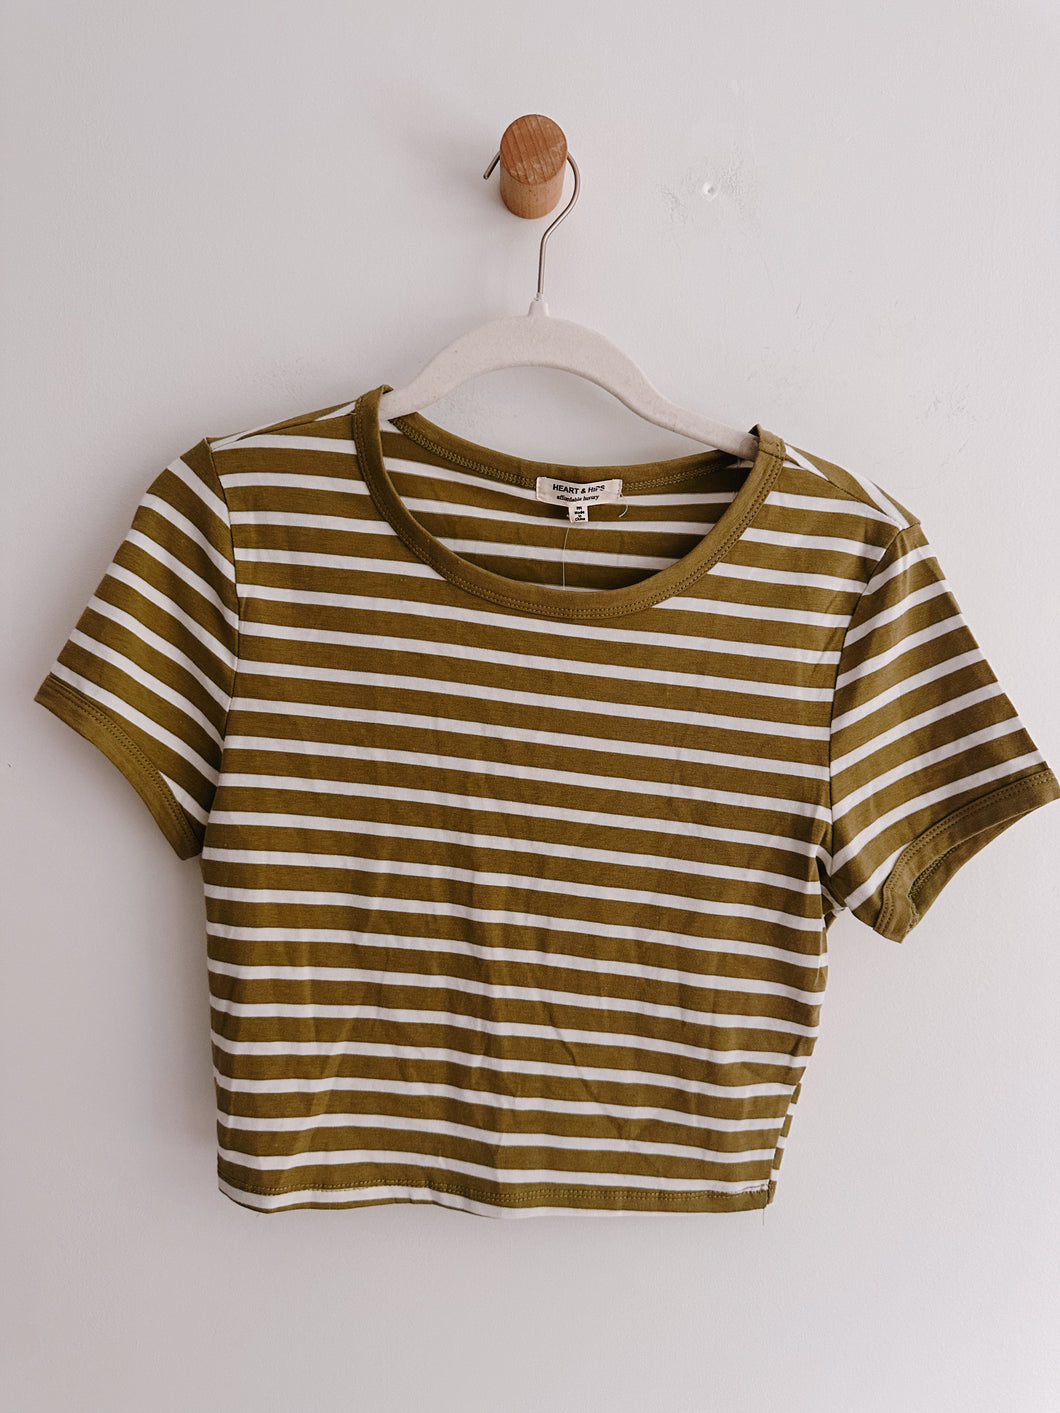 Affordable Luxury Striped Tee - Size M